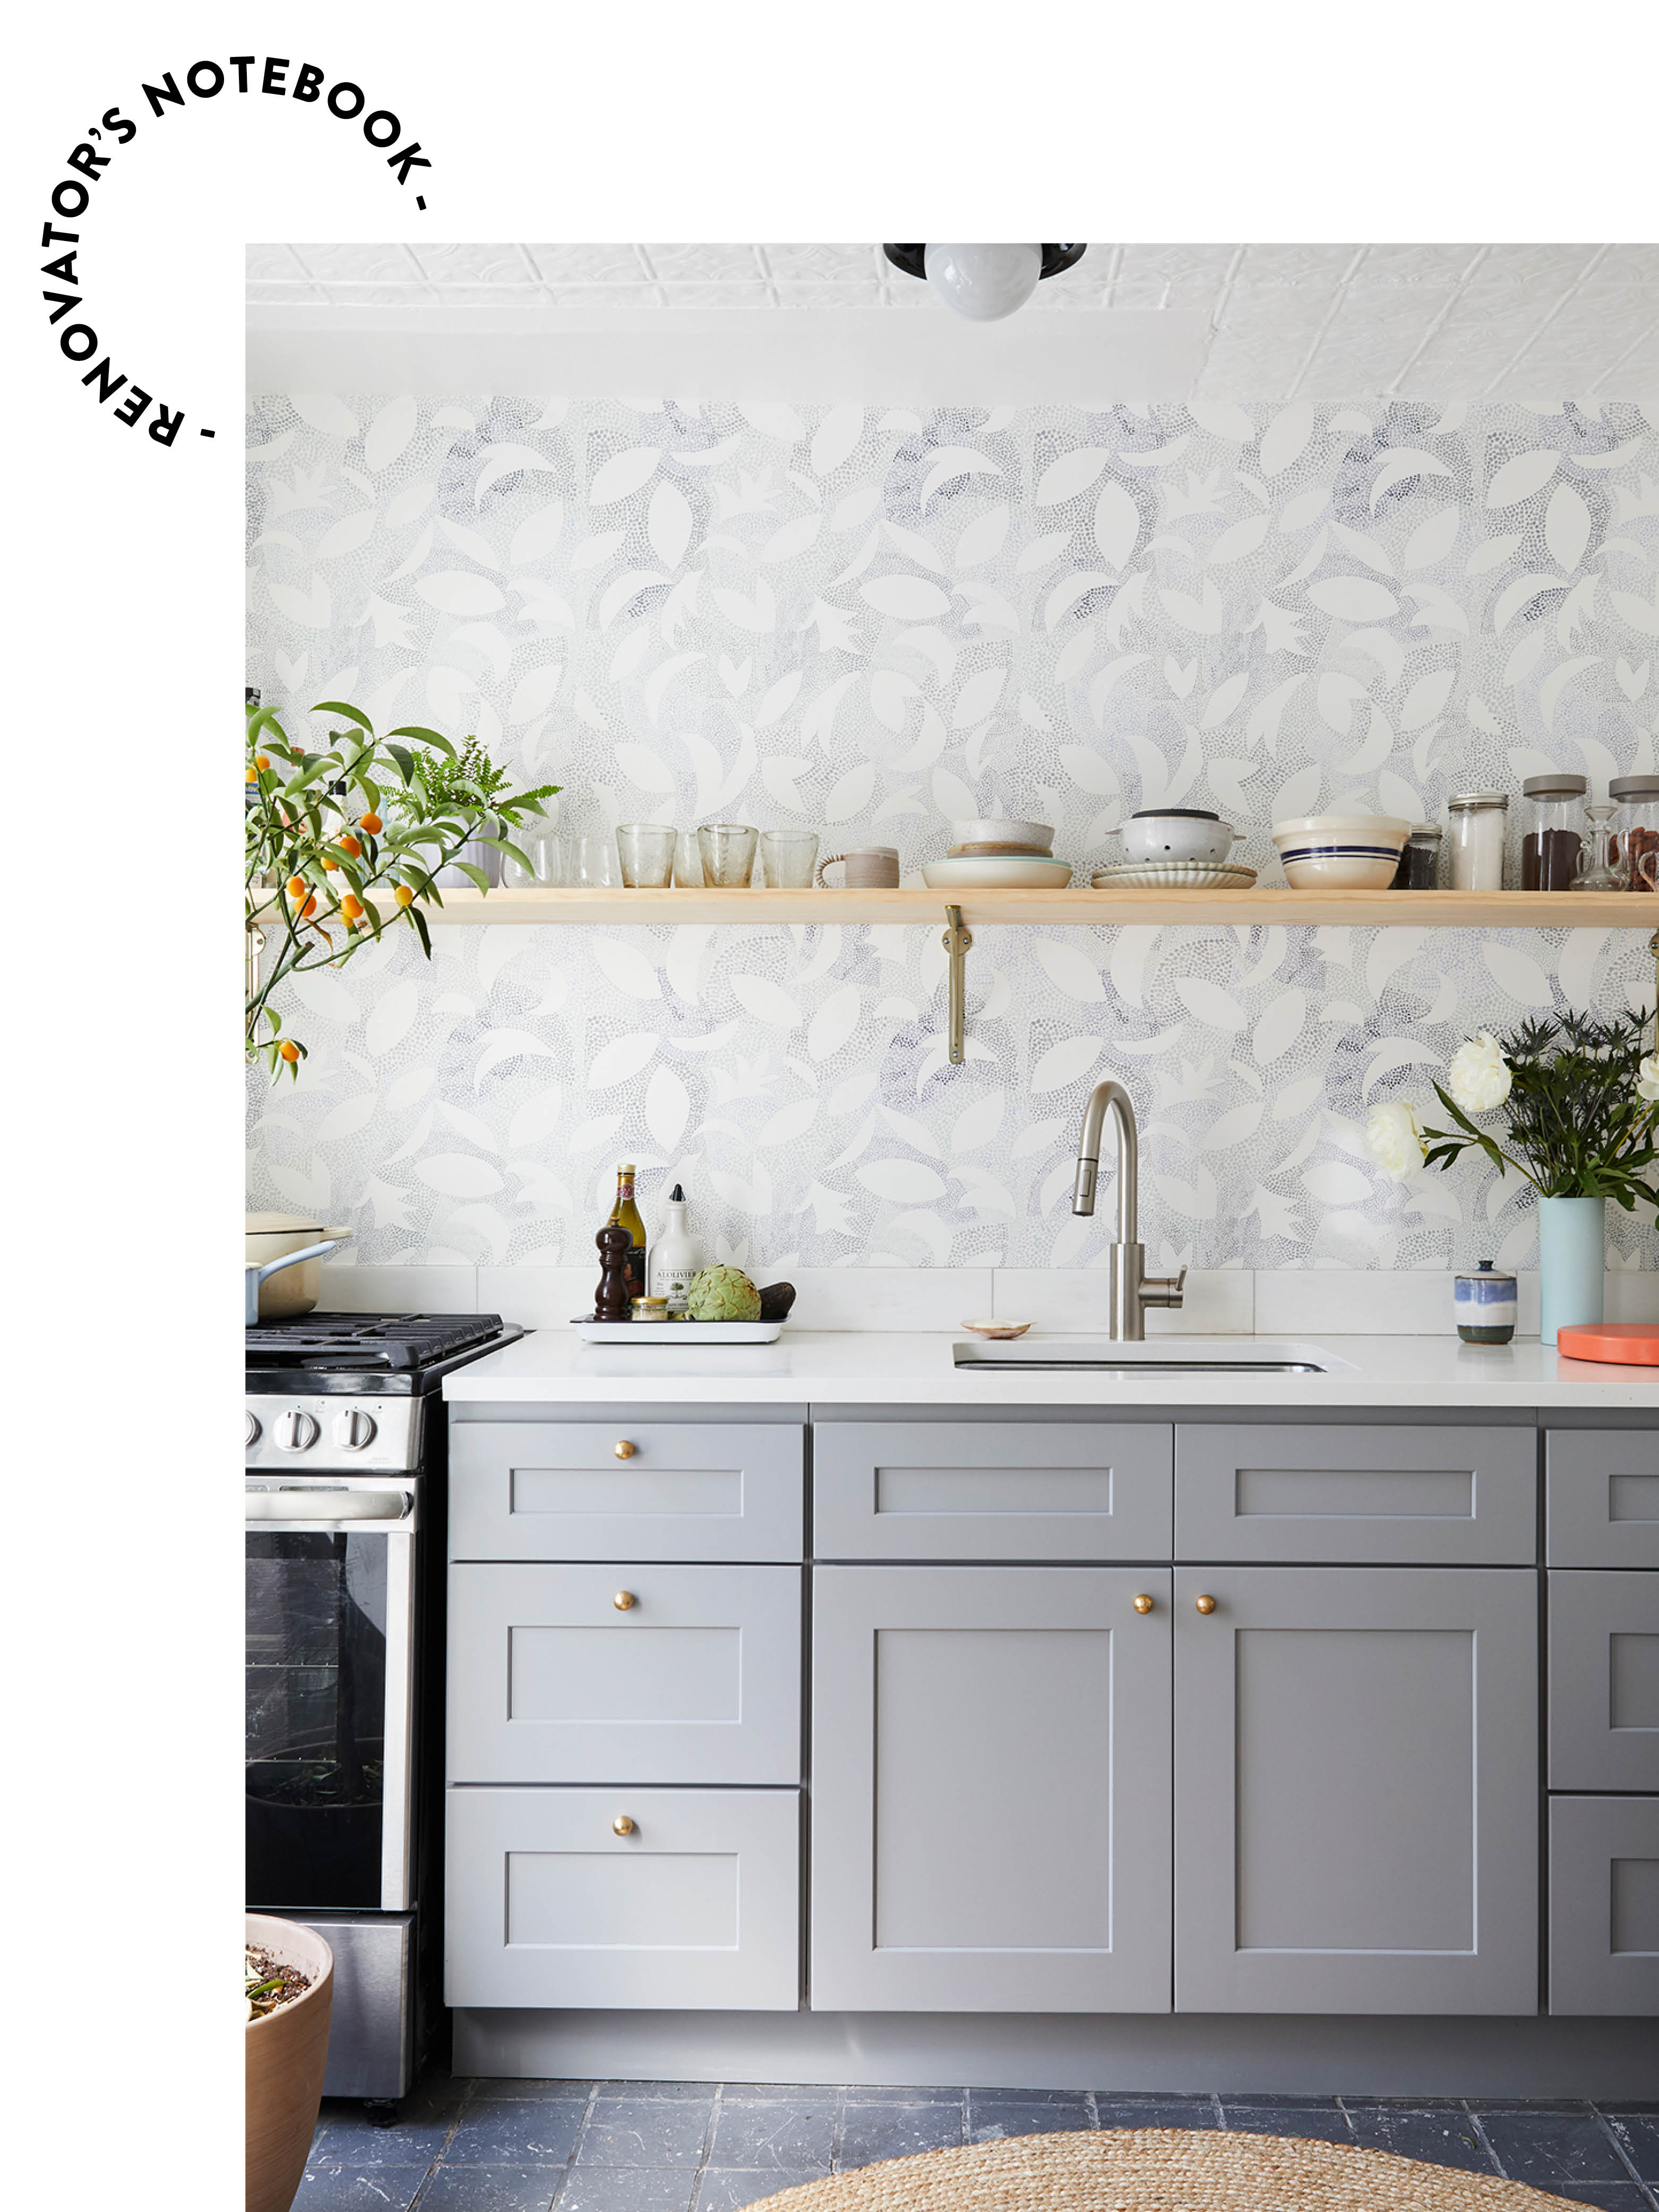 Kate Hamilton Gray Pulled Off Her Rental Kitchen Renovation In Just 2 Weeks